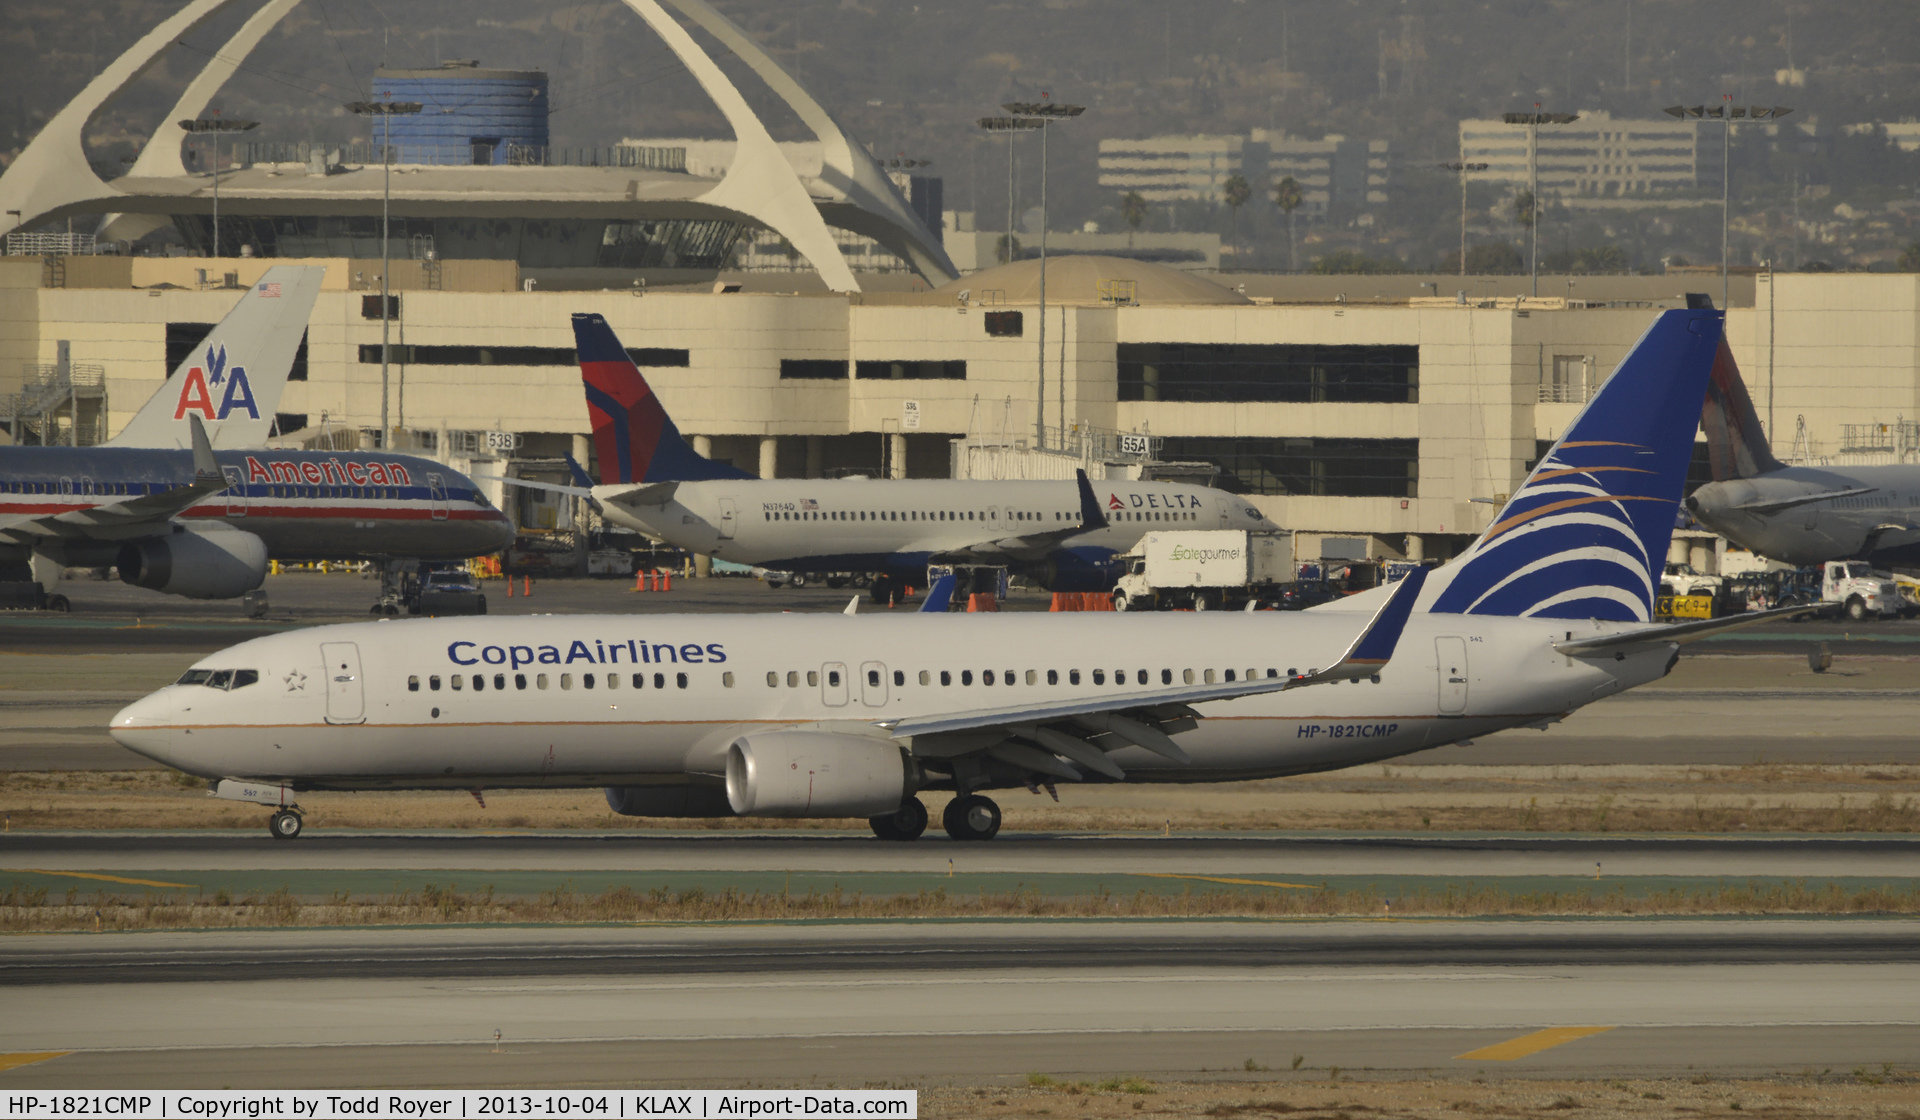 HP-1821CMP, 2012 Boeing 737-8V3 C/N 41089, Taxiing to gate at LAX